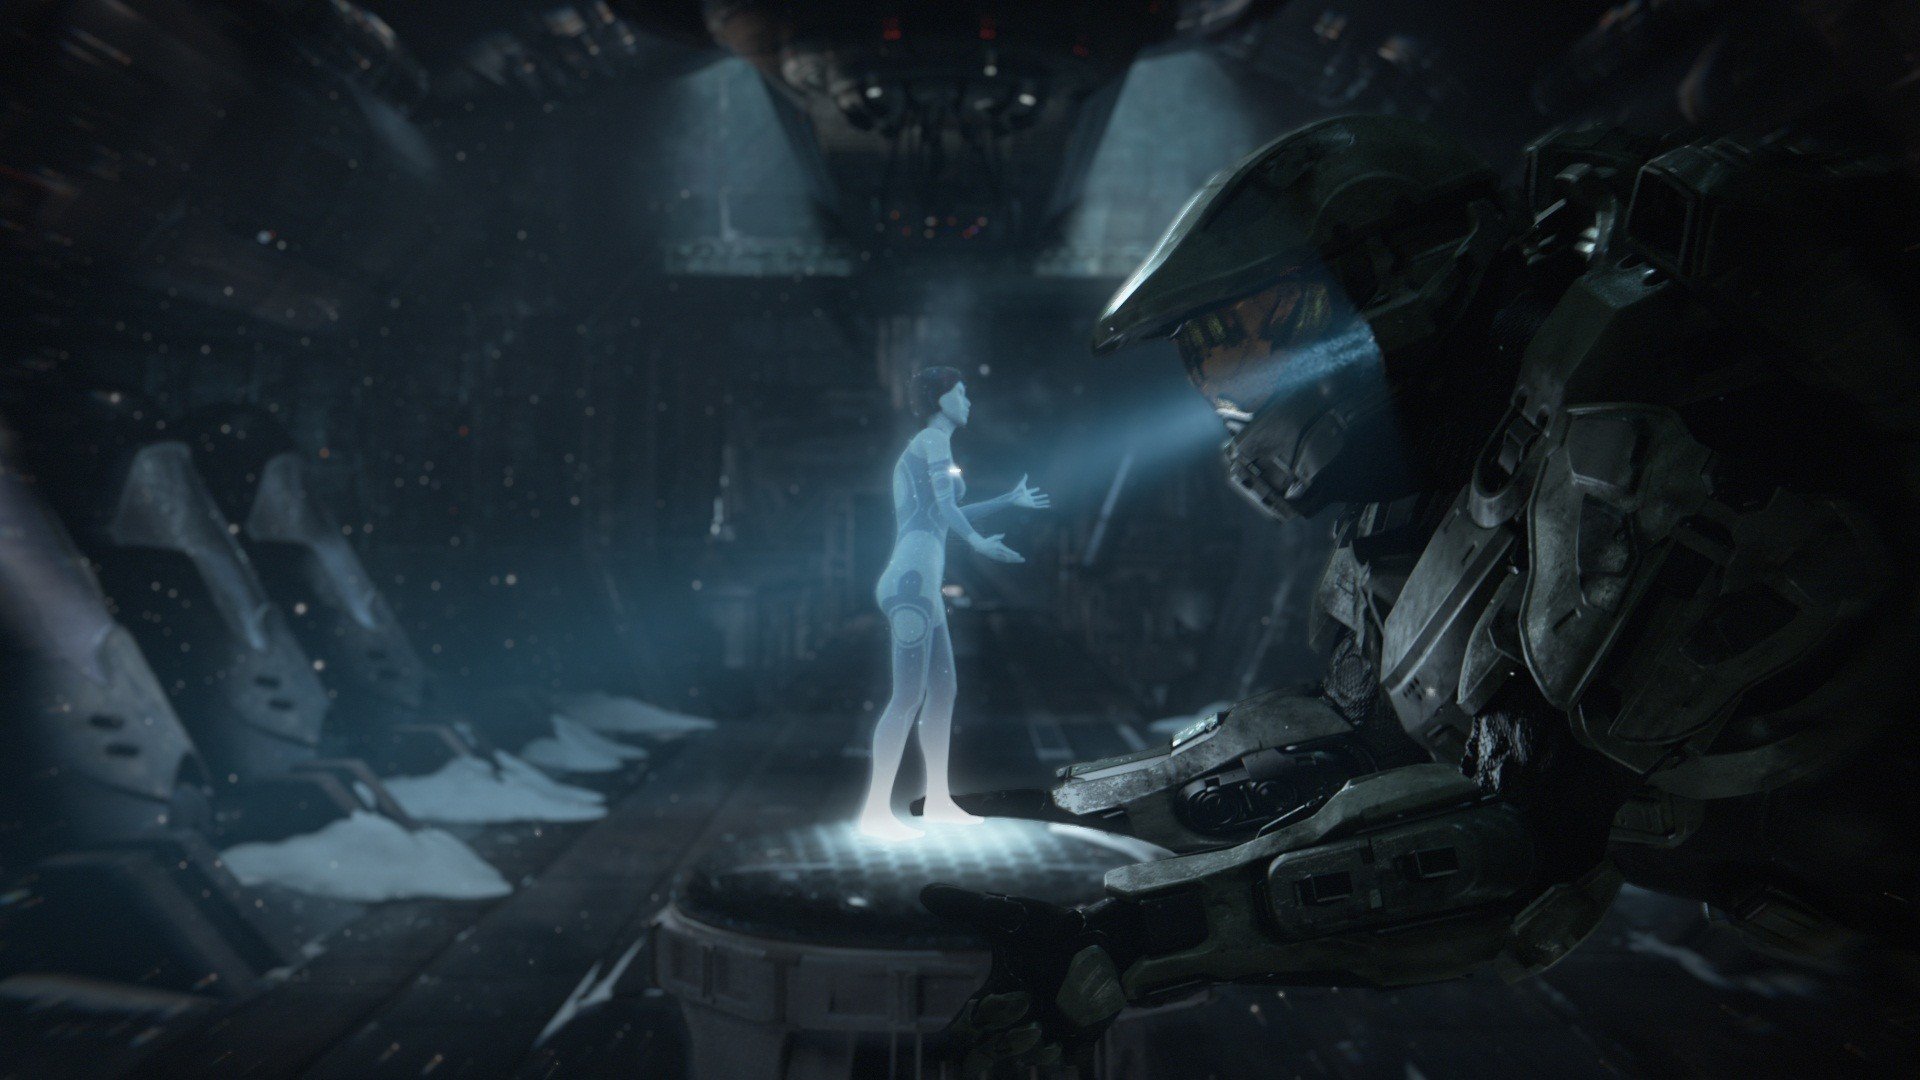 Master Chief, Cortana, Halo Wallpapers HD / Desktop and Mobile Backgrounds.